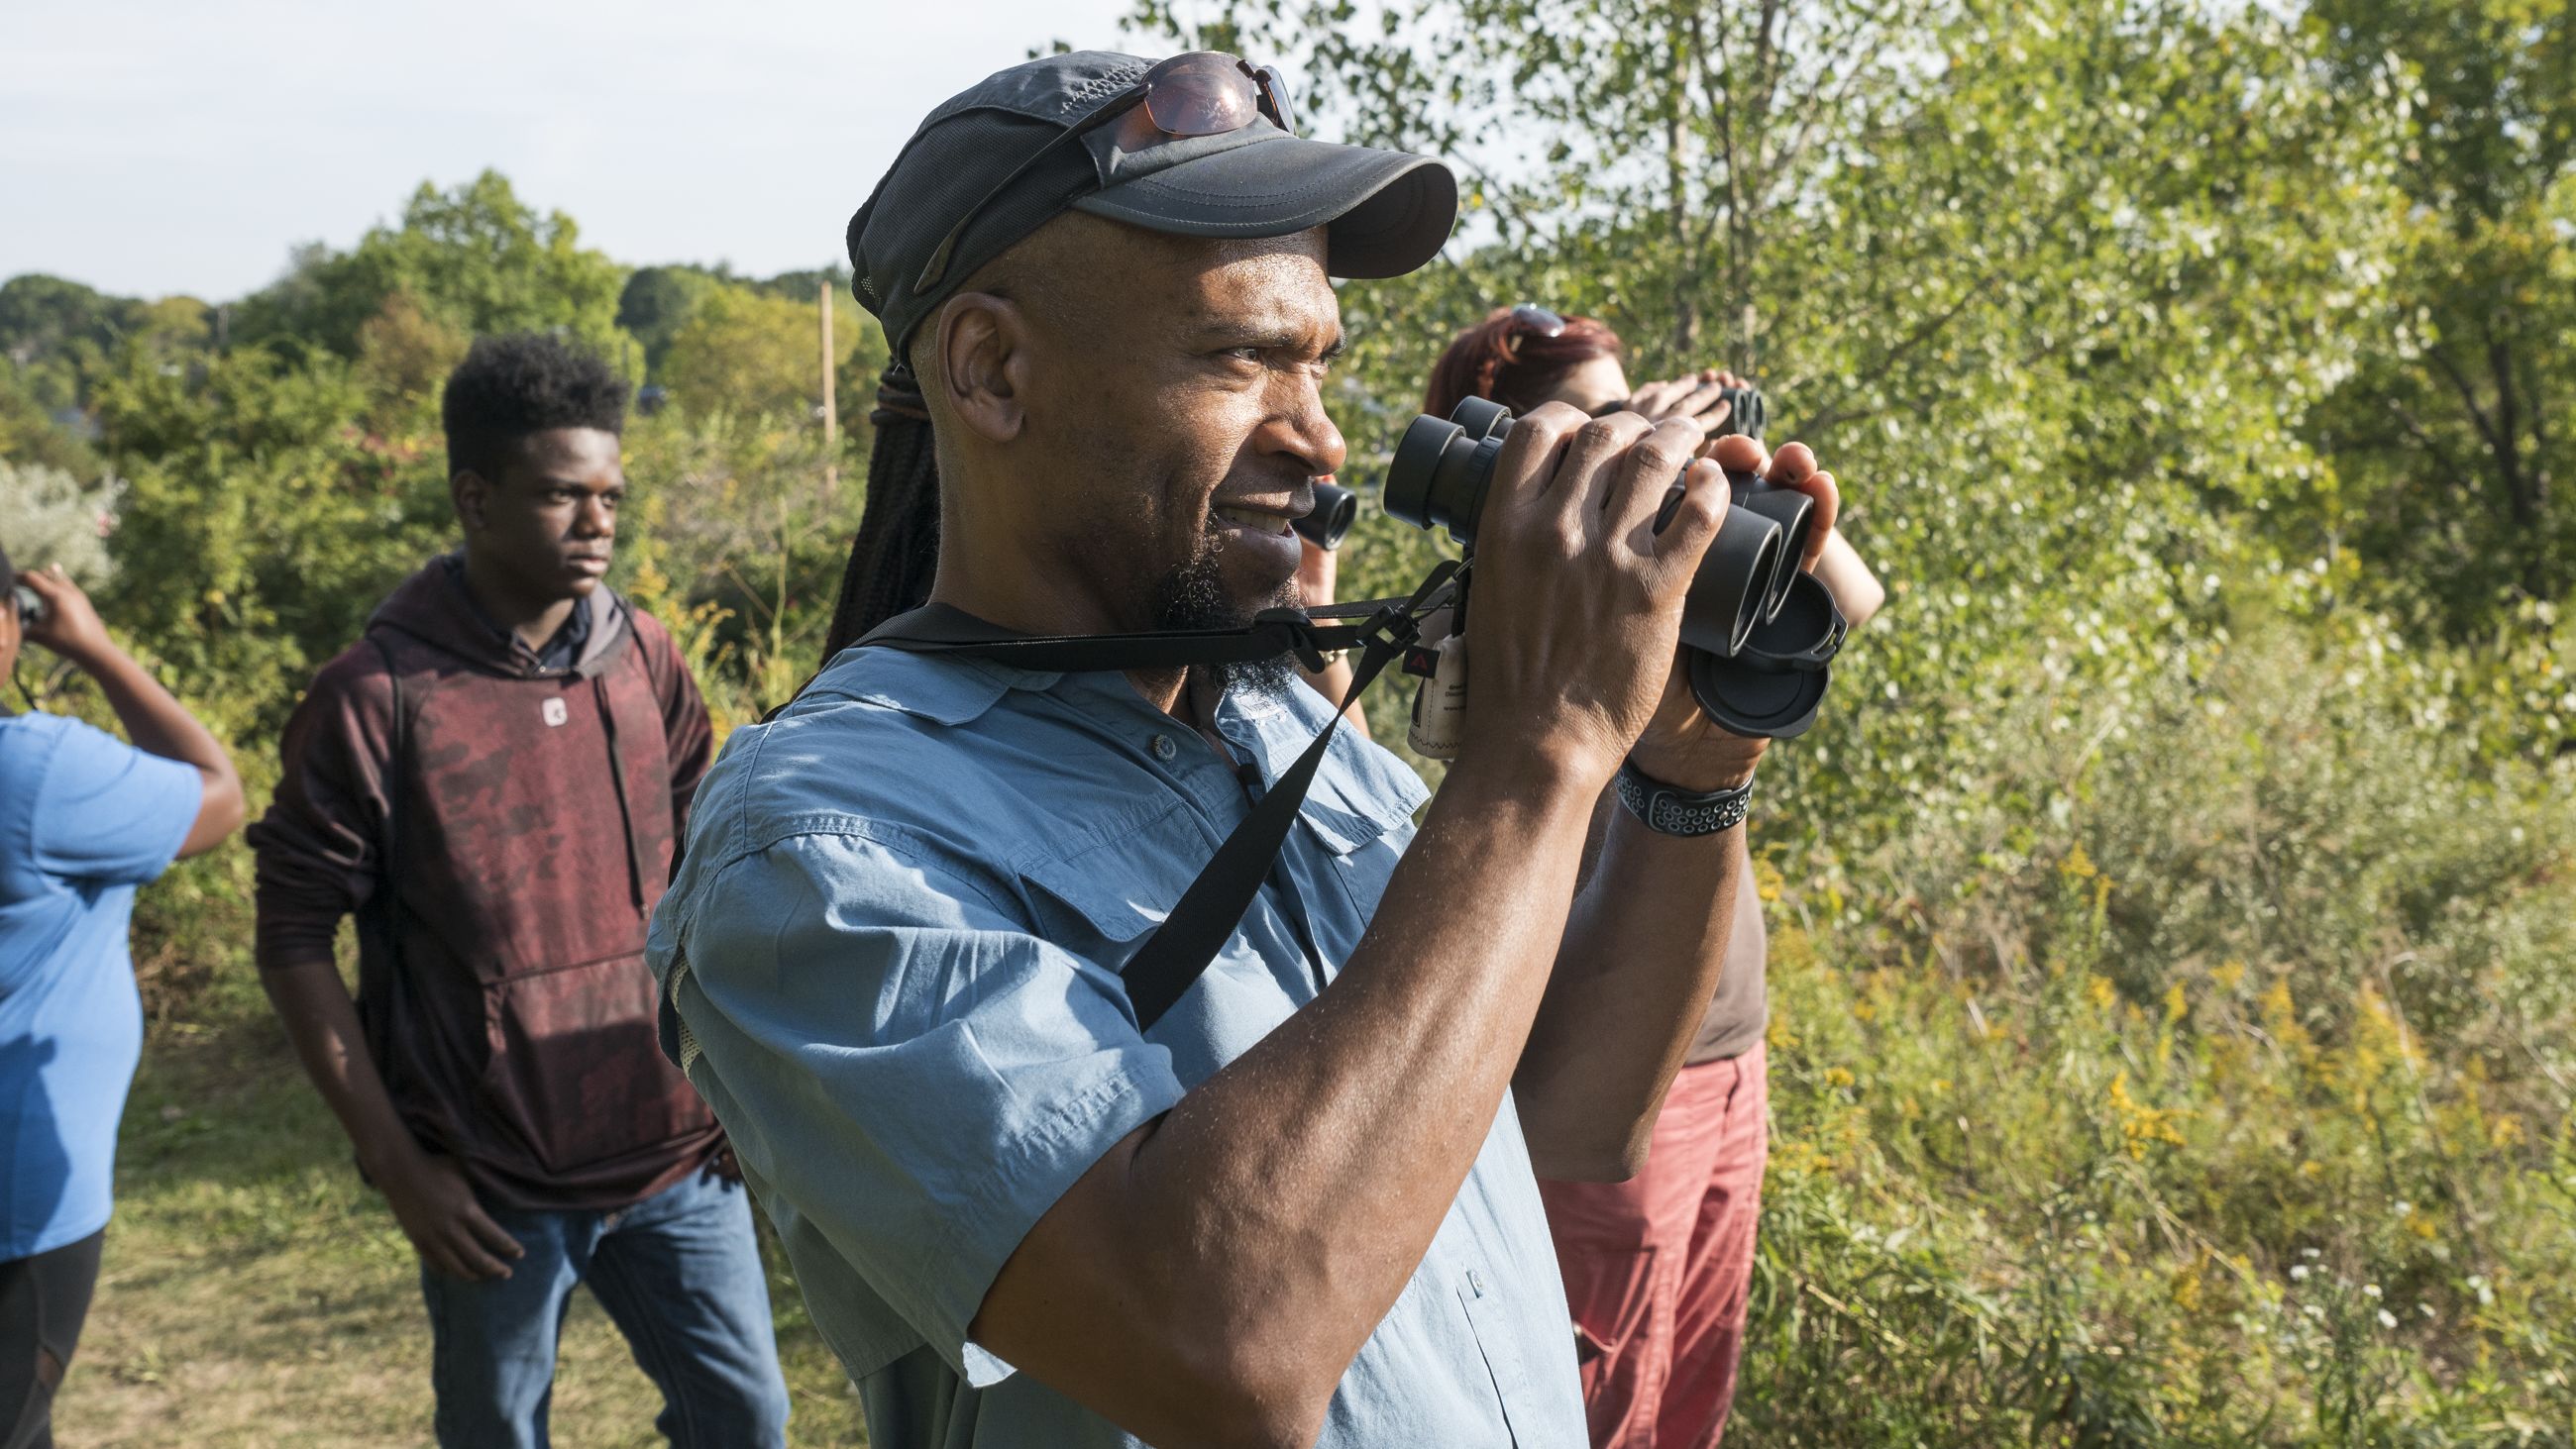 Dudley Edmondson, 58, co-leads a group of Cleveland, Ohio, area students on a nature hike.